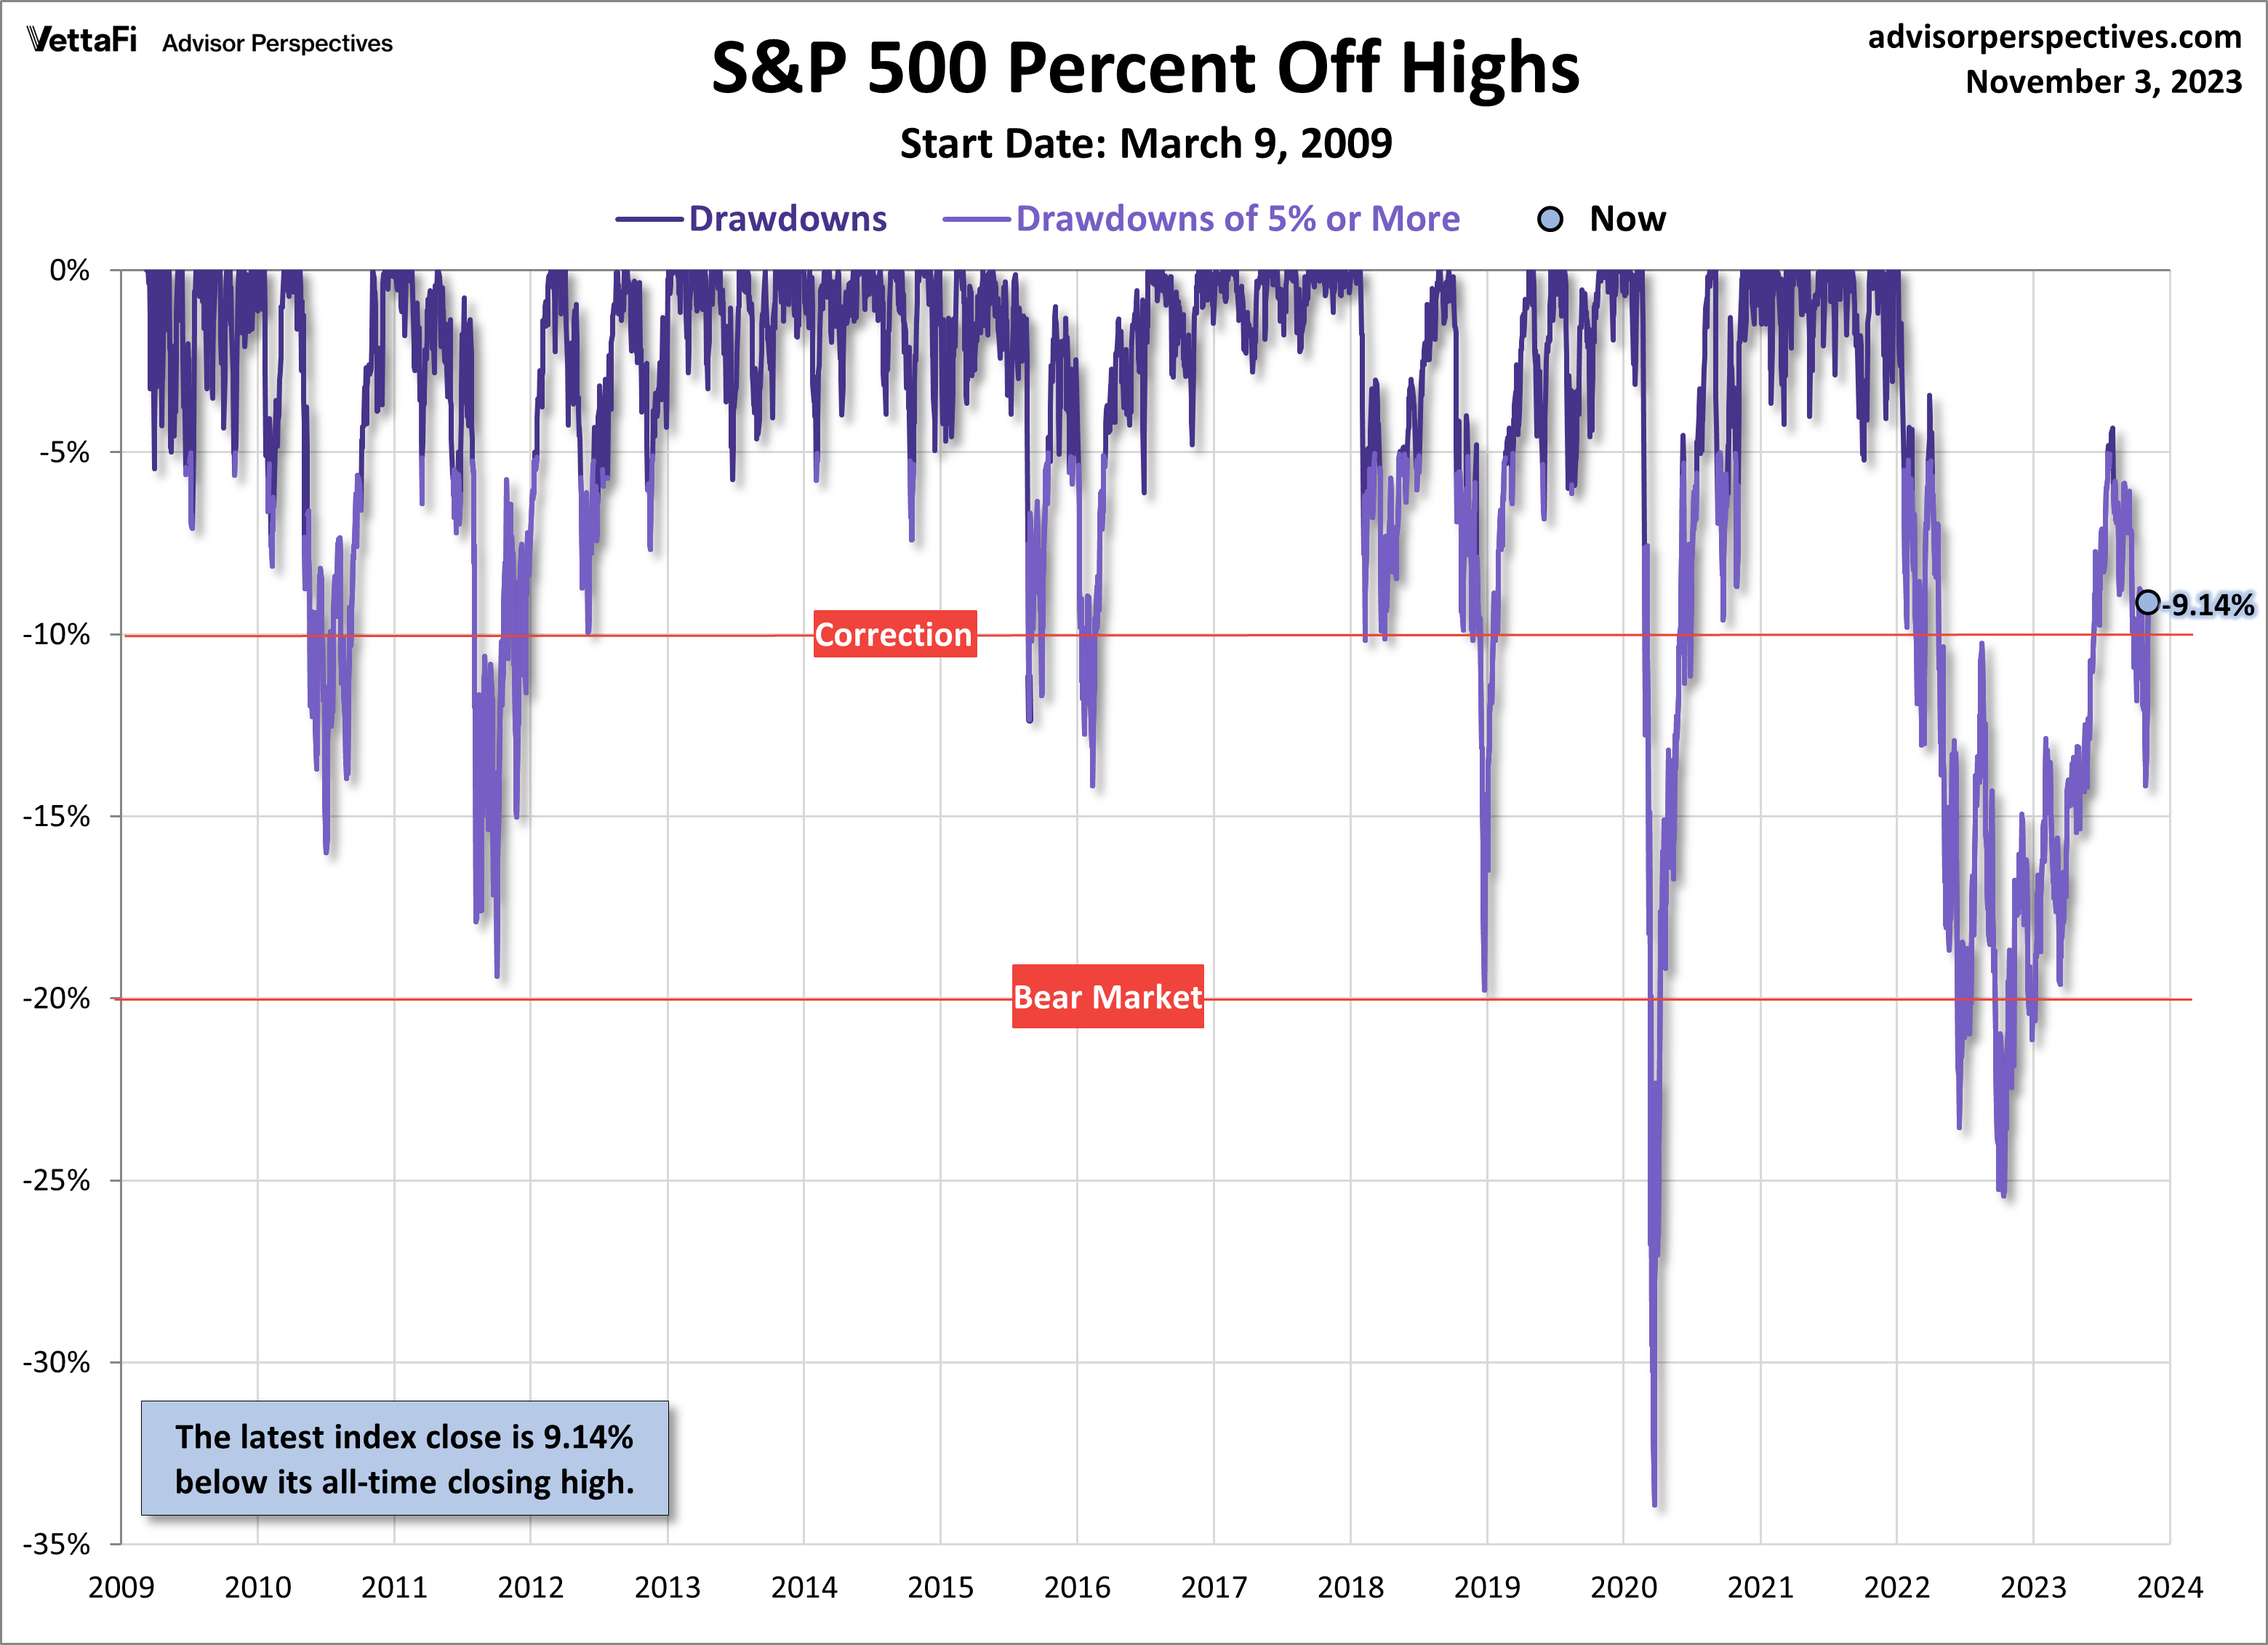 S&P 500 Percent Off Highs starting 3/9/2009